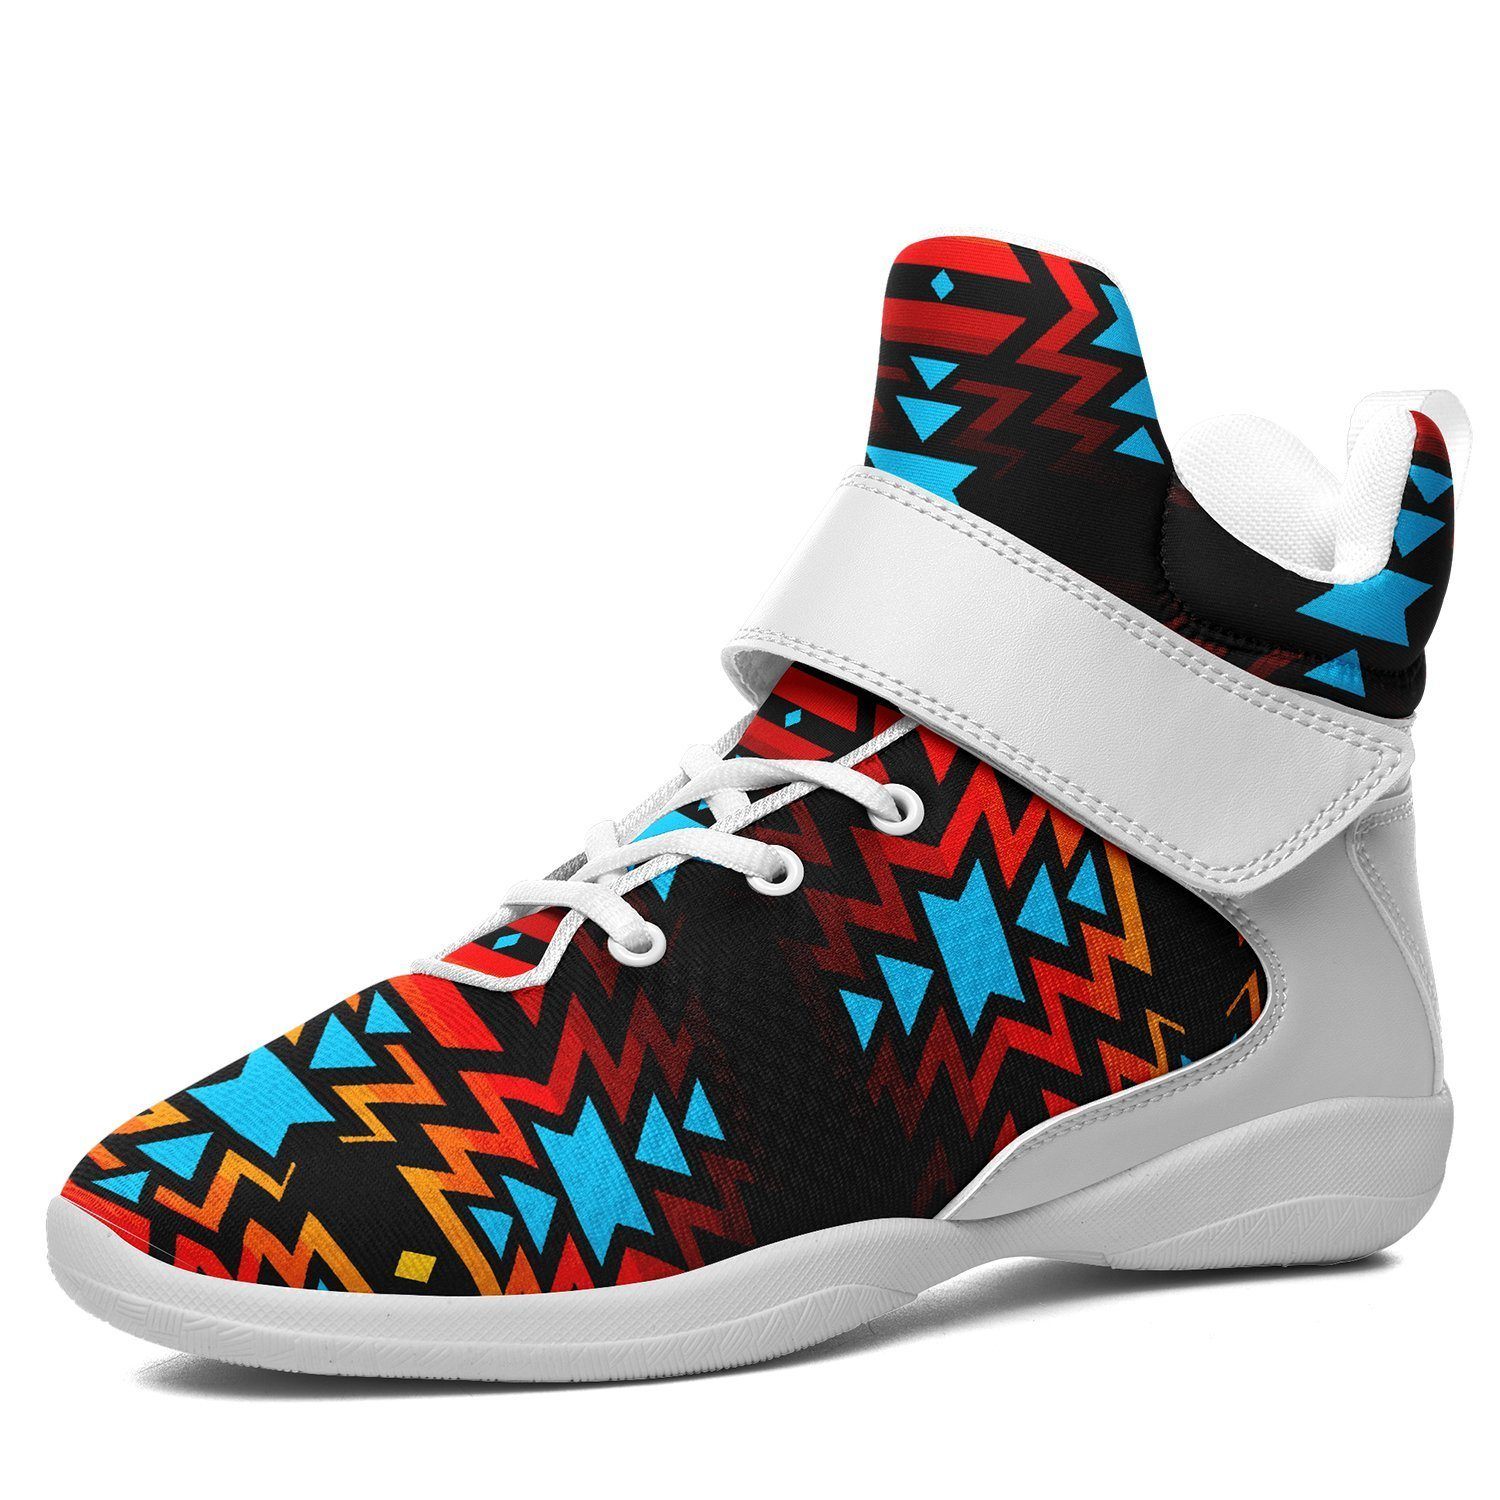 Black Fire and Turquoise Kid's Ipottaa Basketball / Sport High Top Shoes 49 Dzine US Child 12.5 / EUR 30 White Sole with White Strap 